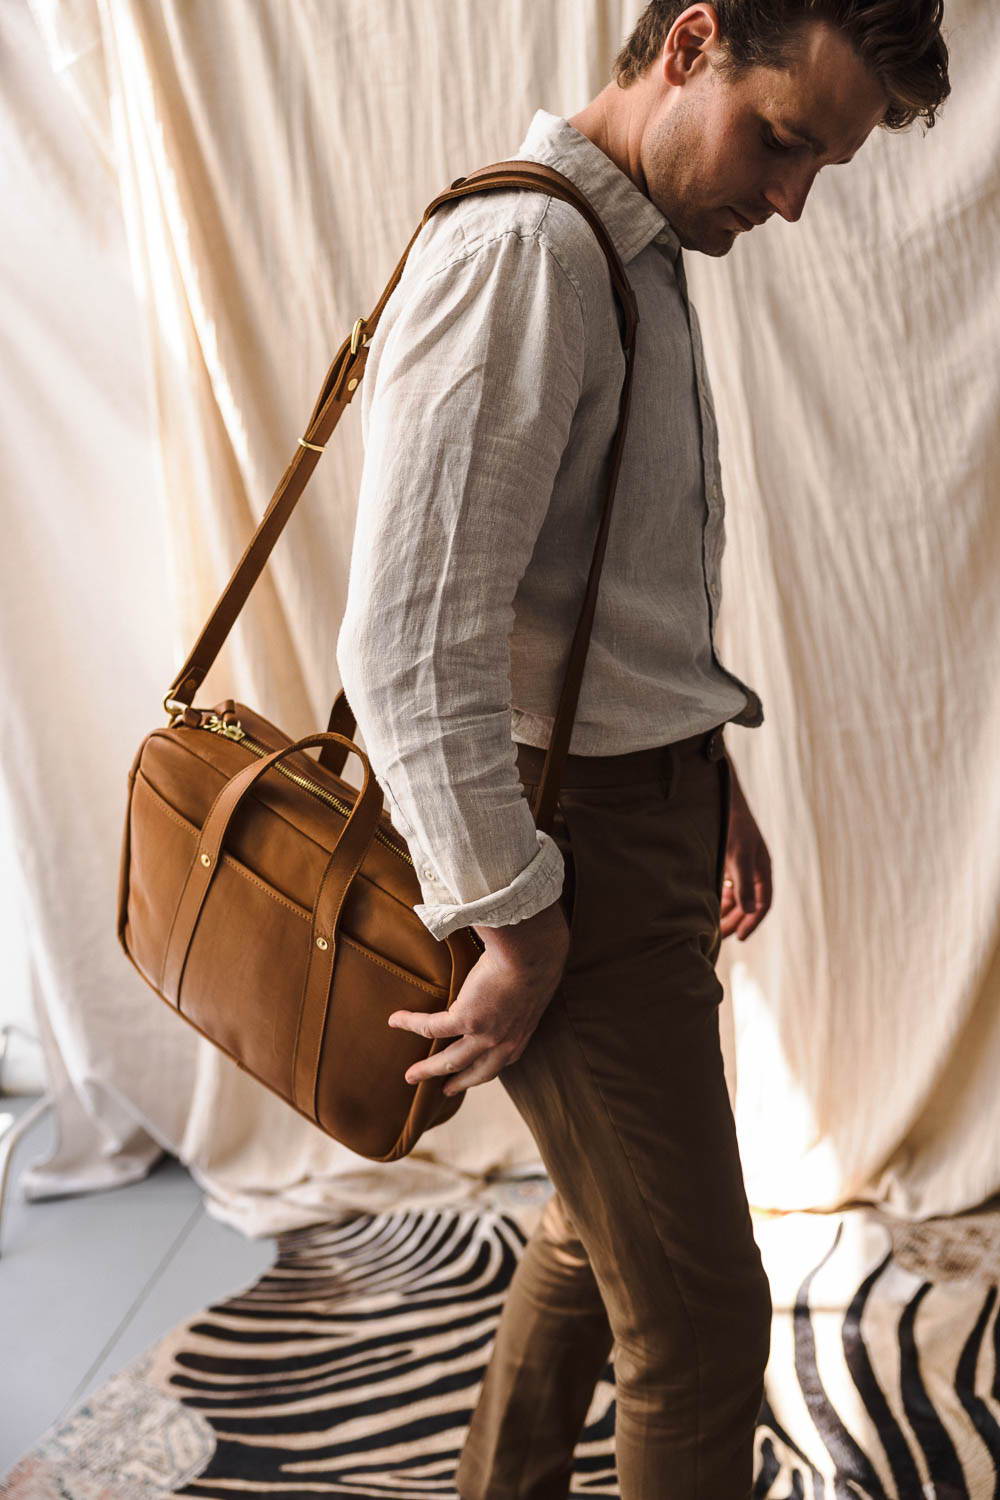 over the shoulder bags are men's leather holdalls